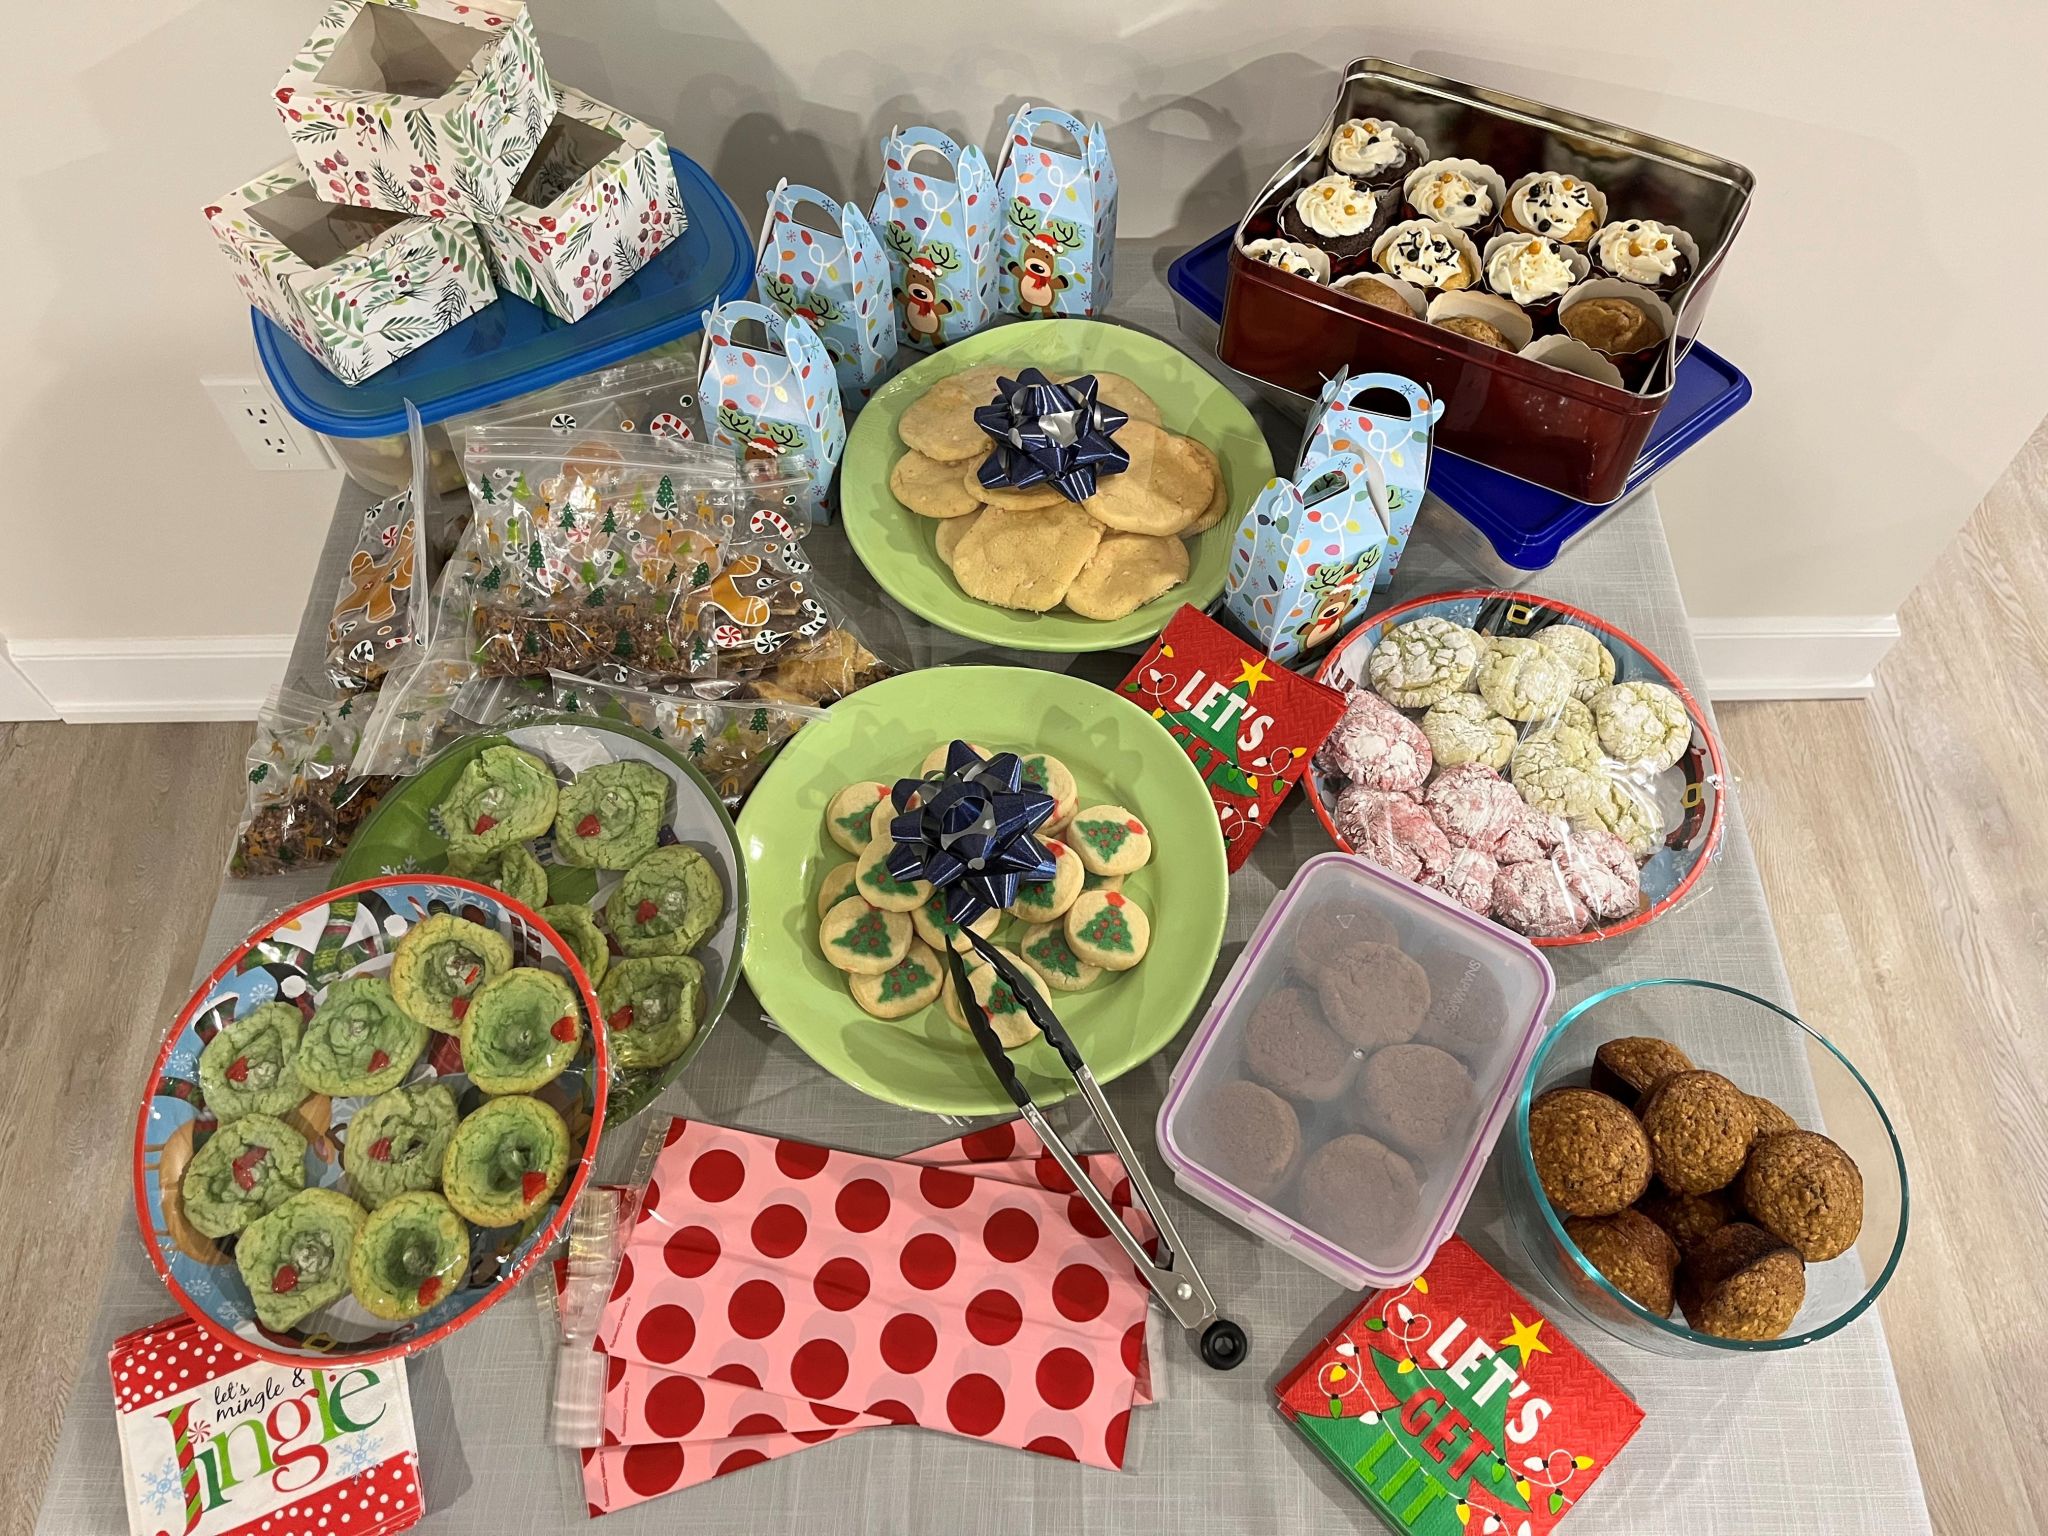 Cookies and other treats for the Bradford bake sale